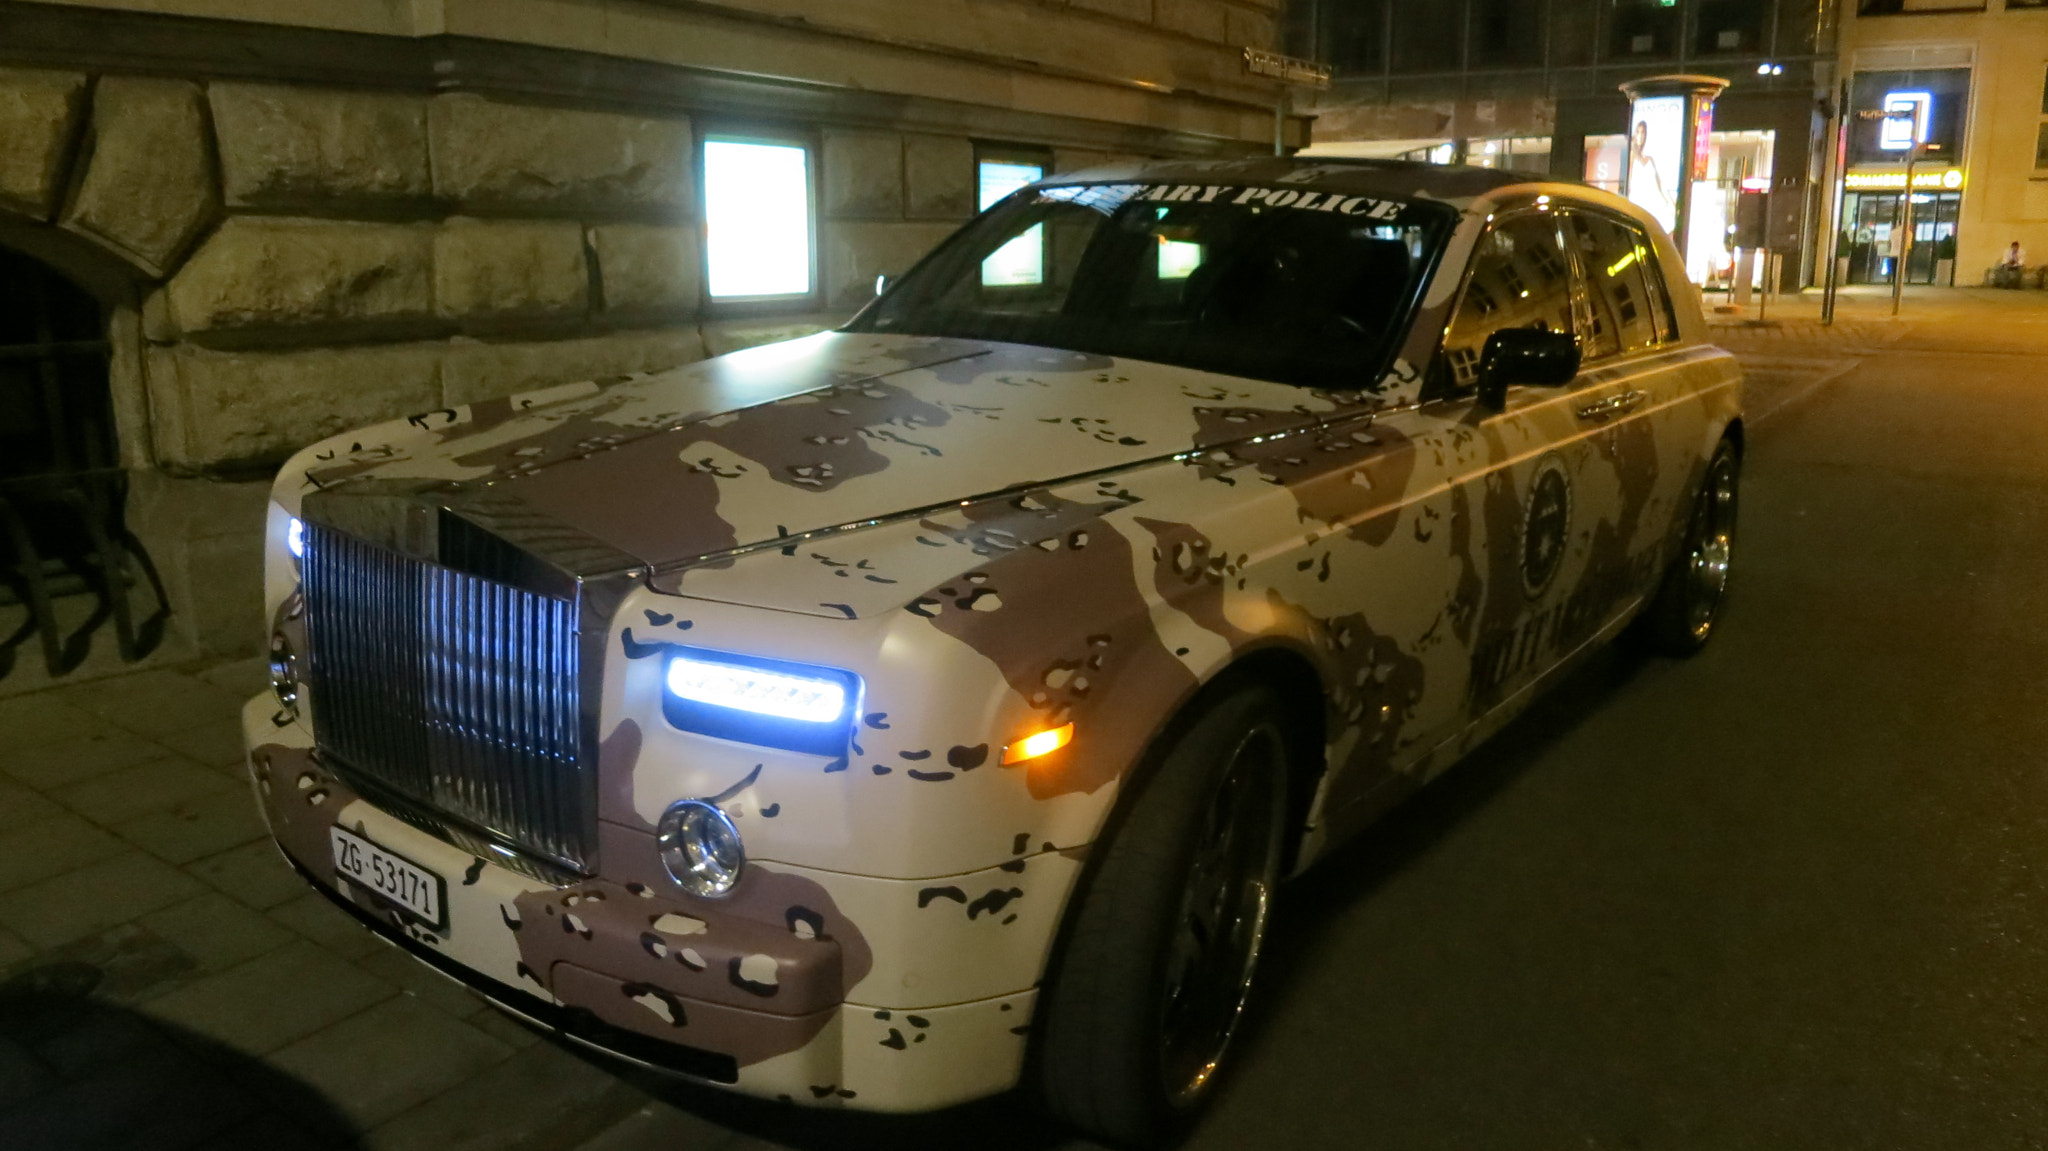 Canon PowerShot S100 sample photo. Minich at night: a rolls royce phantom vi with camouflage body painting. photography